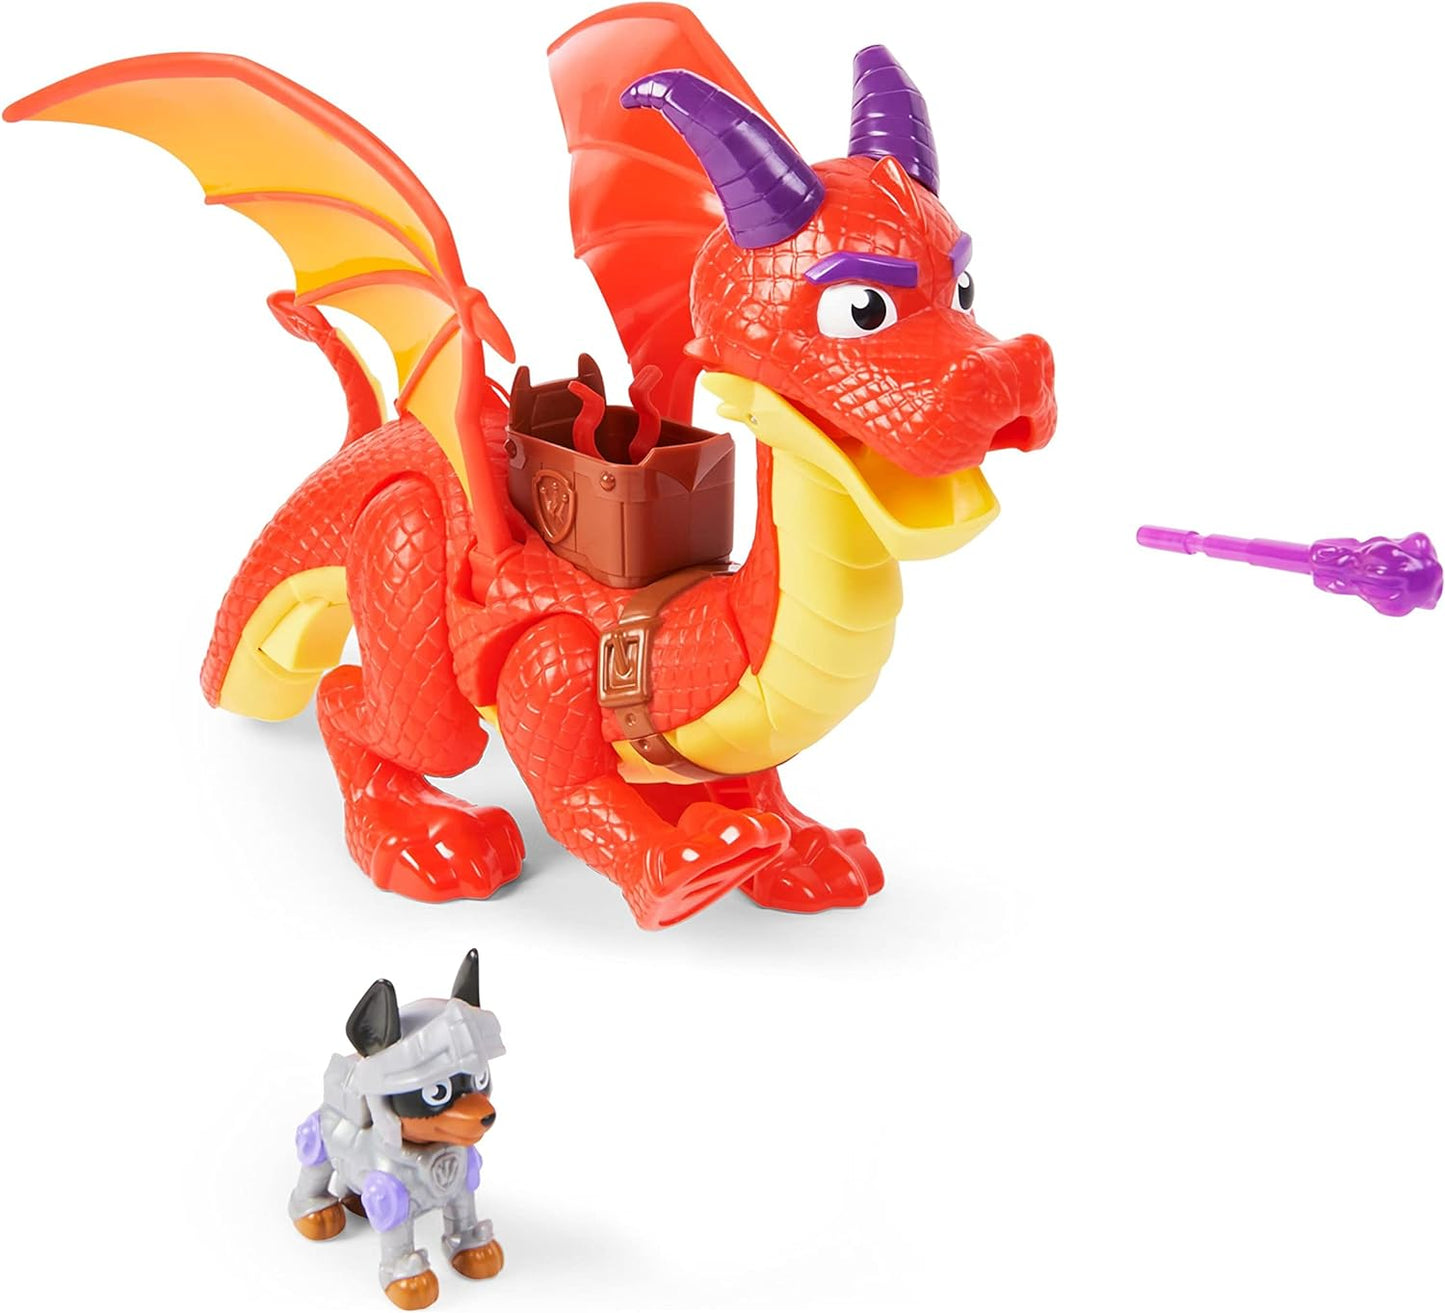 Paw Patrol - Rescue Knights Sparks The Dragon with Claw Action Figures